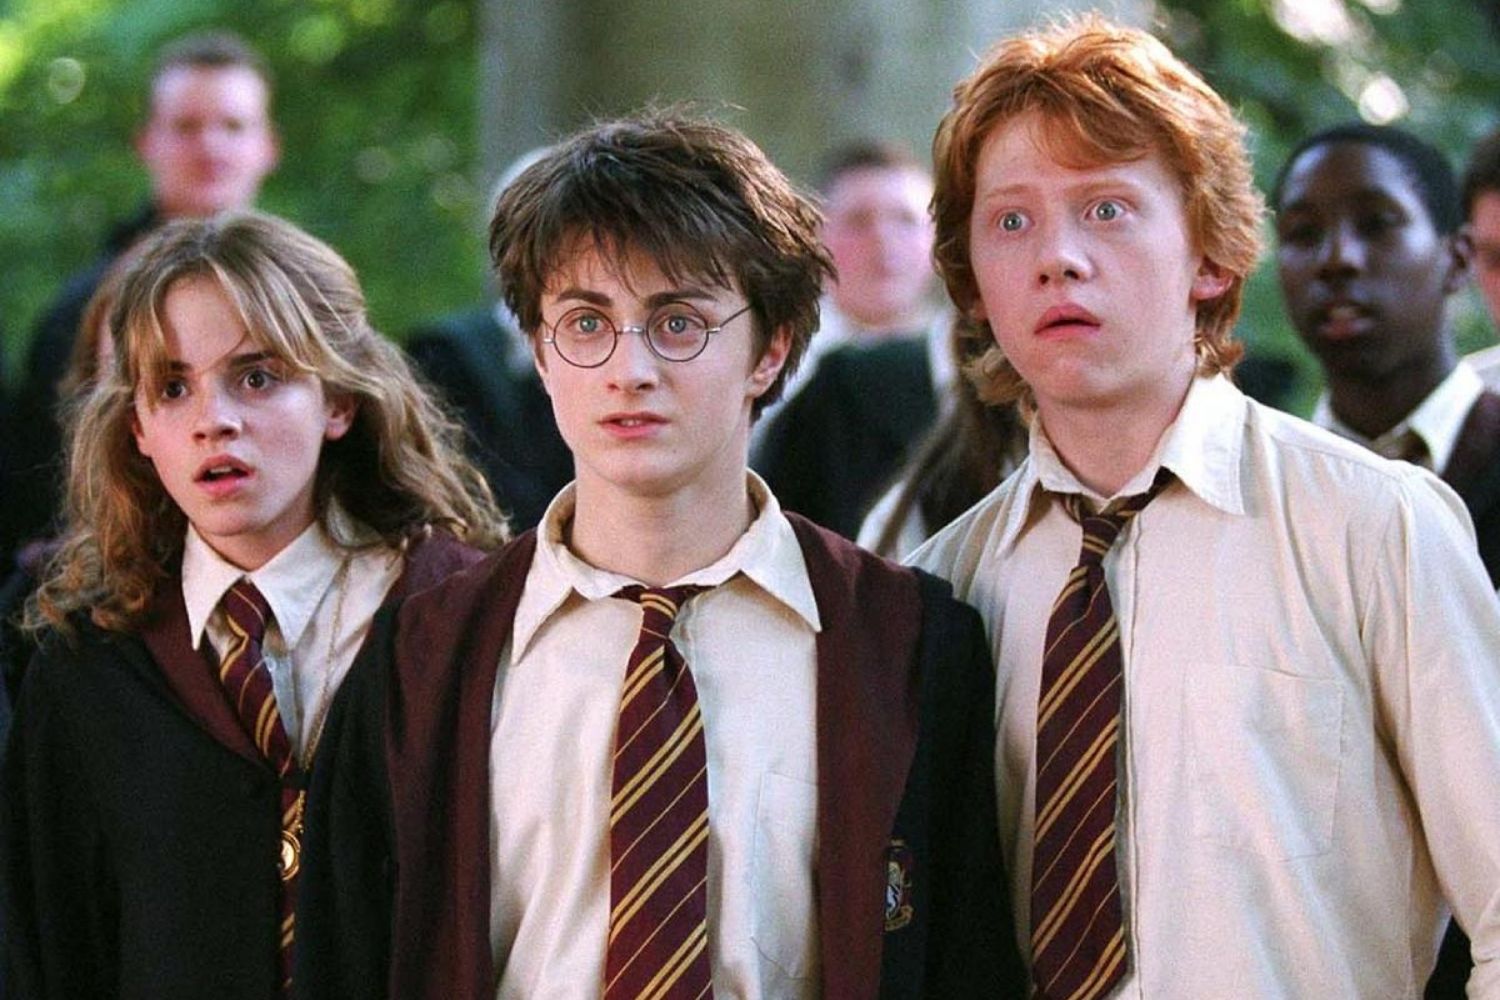 The ‘Harry Potter’ Cast Are Revealing Their Co-Star Crushes And Daniel Radcliffe’s Is Truly Surprising